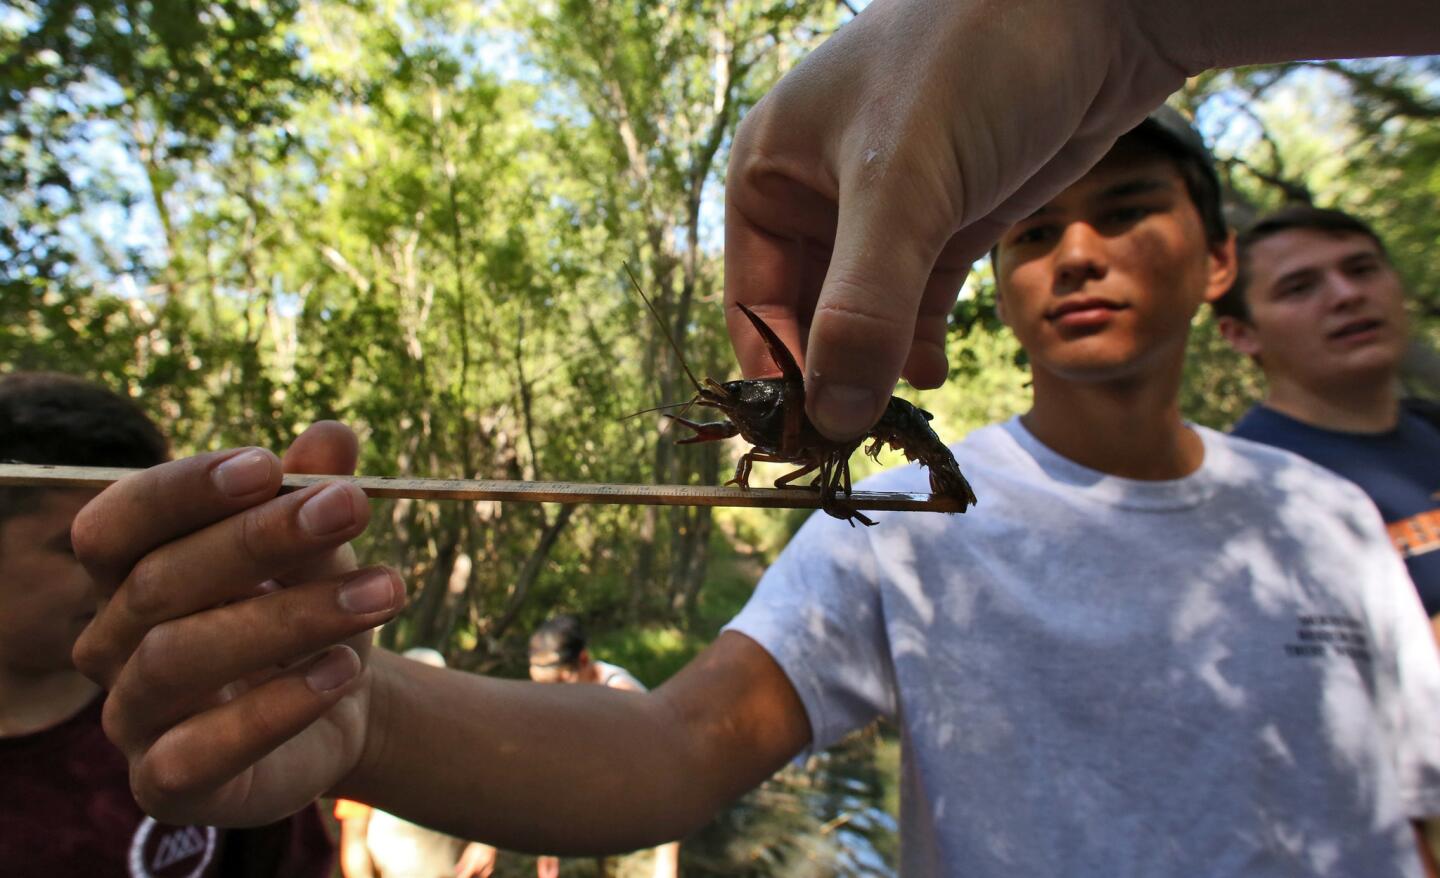 Josh Myers, 18, and Jordan Seah, 22, measure a crayfish caught in the Santa Monica Mountains. The nonnative 3-inch-long crayfish has colonized and multiplied in the 109-square-mile Malibu Creek watershed over the last century.